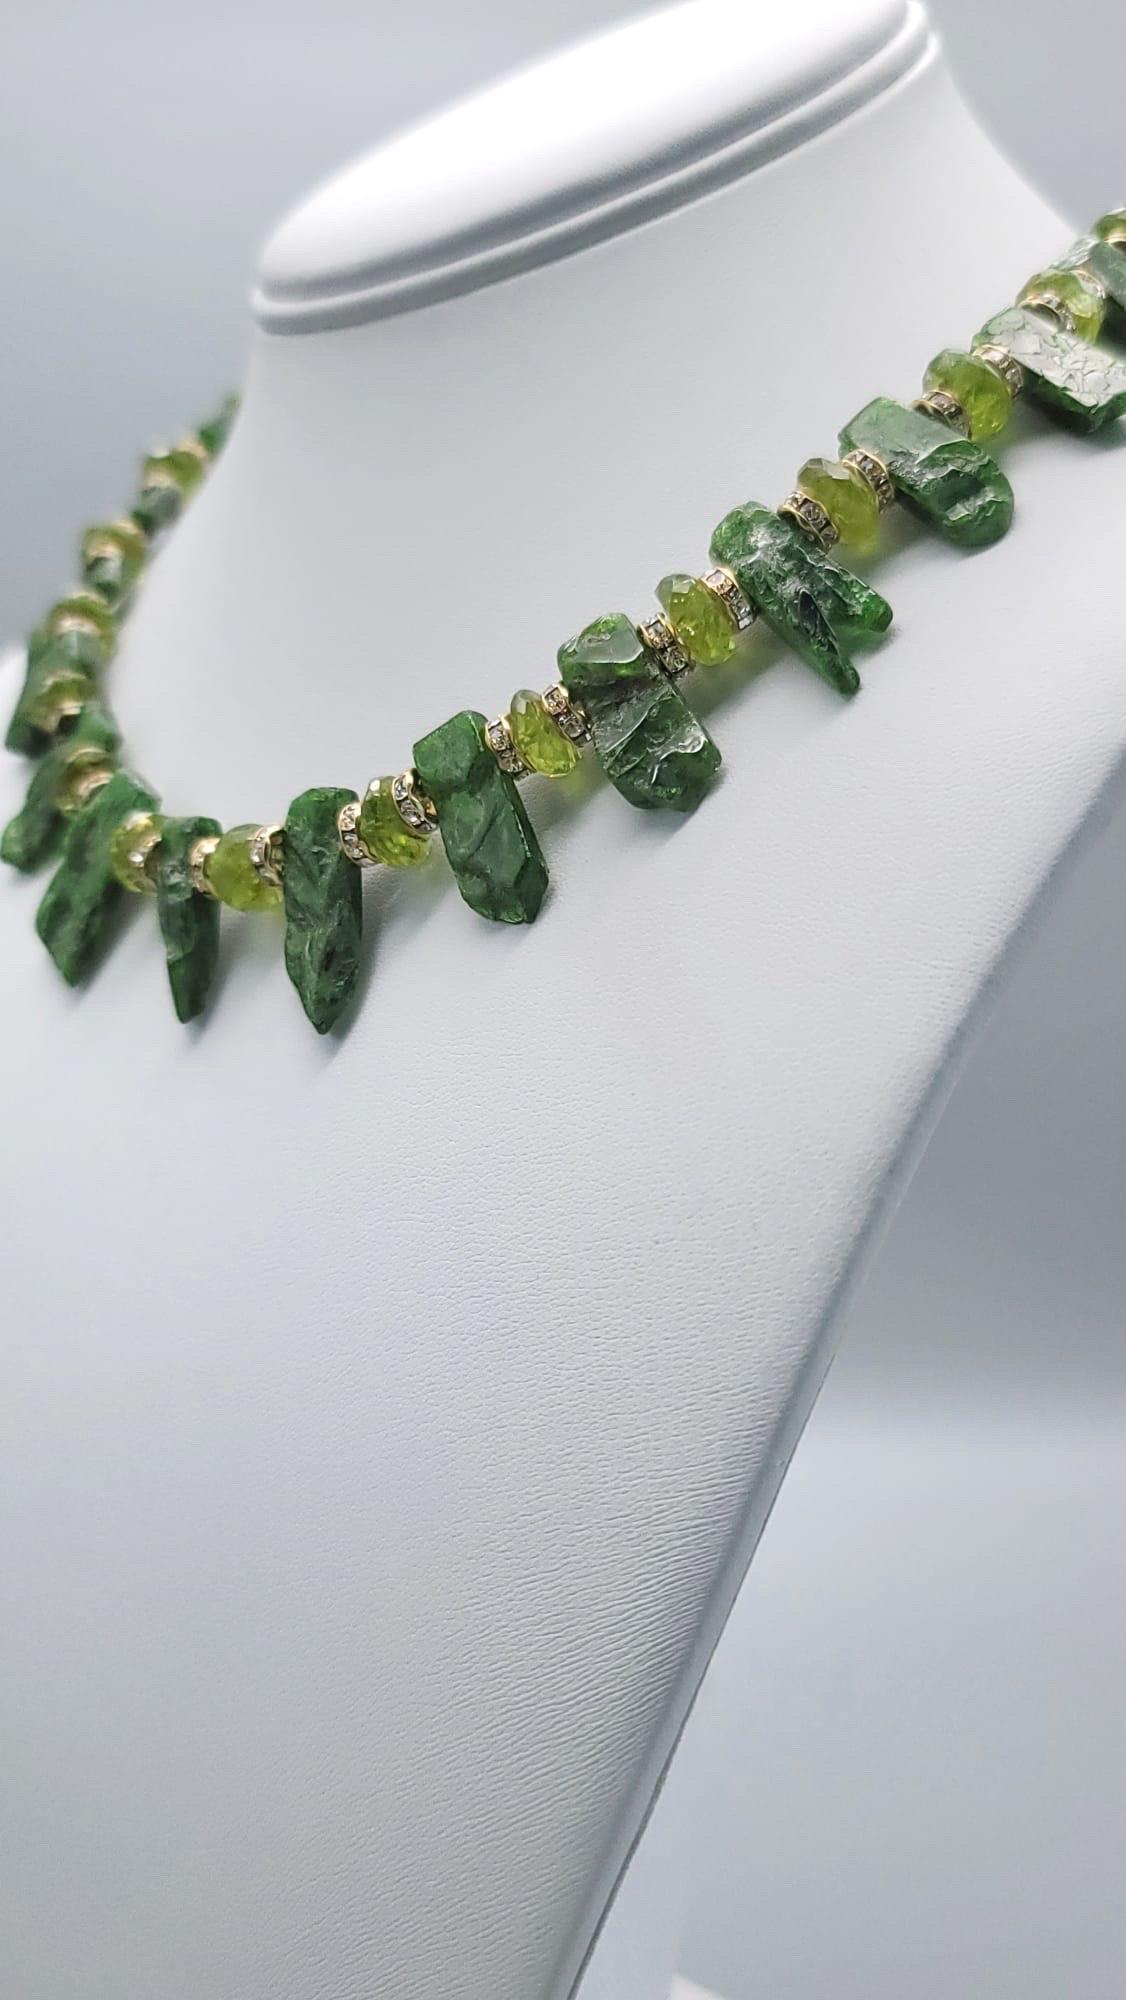 One-of-a-Kind

Gorgeous green Chrome Diopside paired with Peridot, a tone lighter, makes a striking statement. The Chrome Diopside is cut very cleverly to appear rough on the front  side and smooth on the underside ,as well as thin jagged finish on